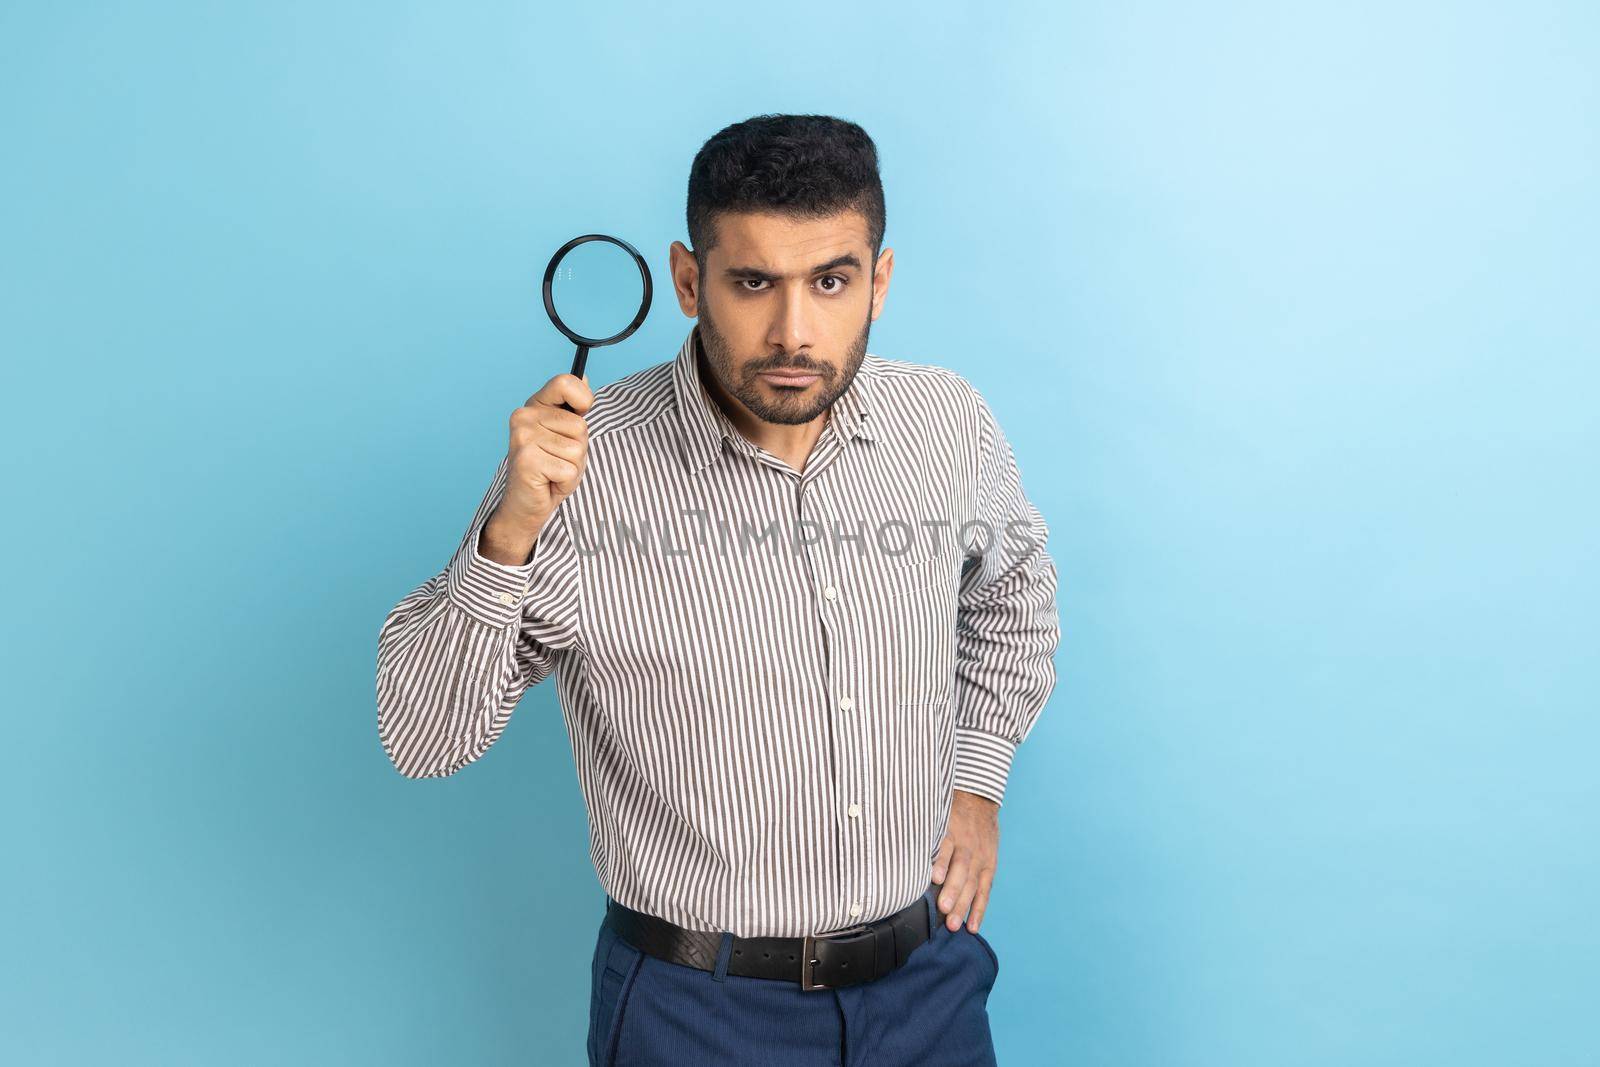 Serious man with beard looking at camera and holding magnifying glass, spying, finding out something, exploring, inspecting, wearing striped shirt. Indoor studio shot isolated on blue background.